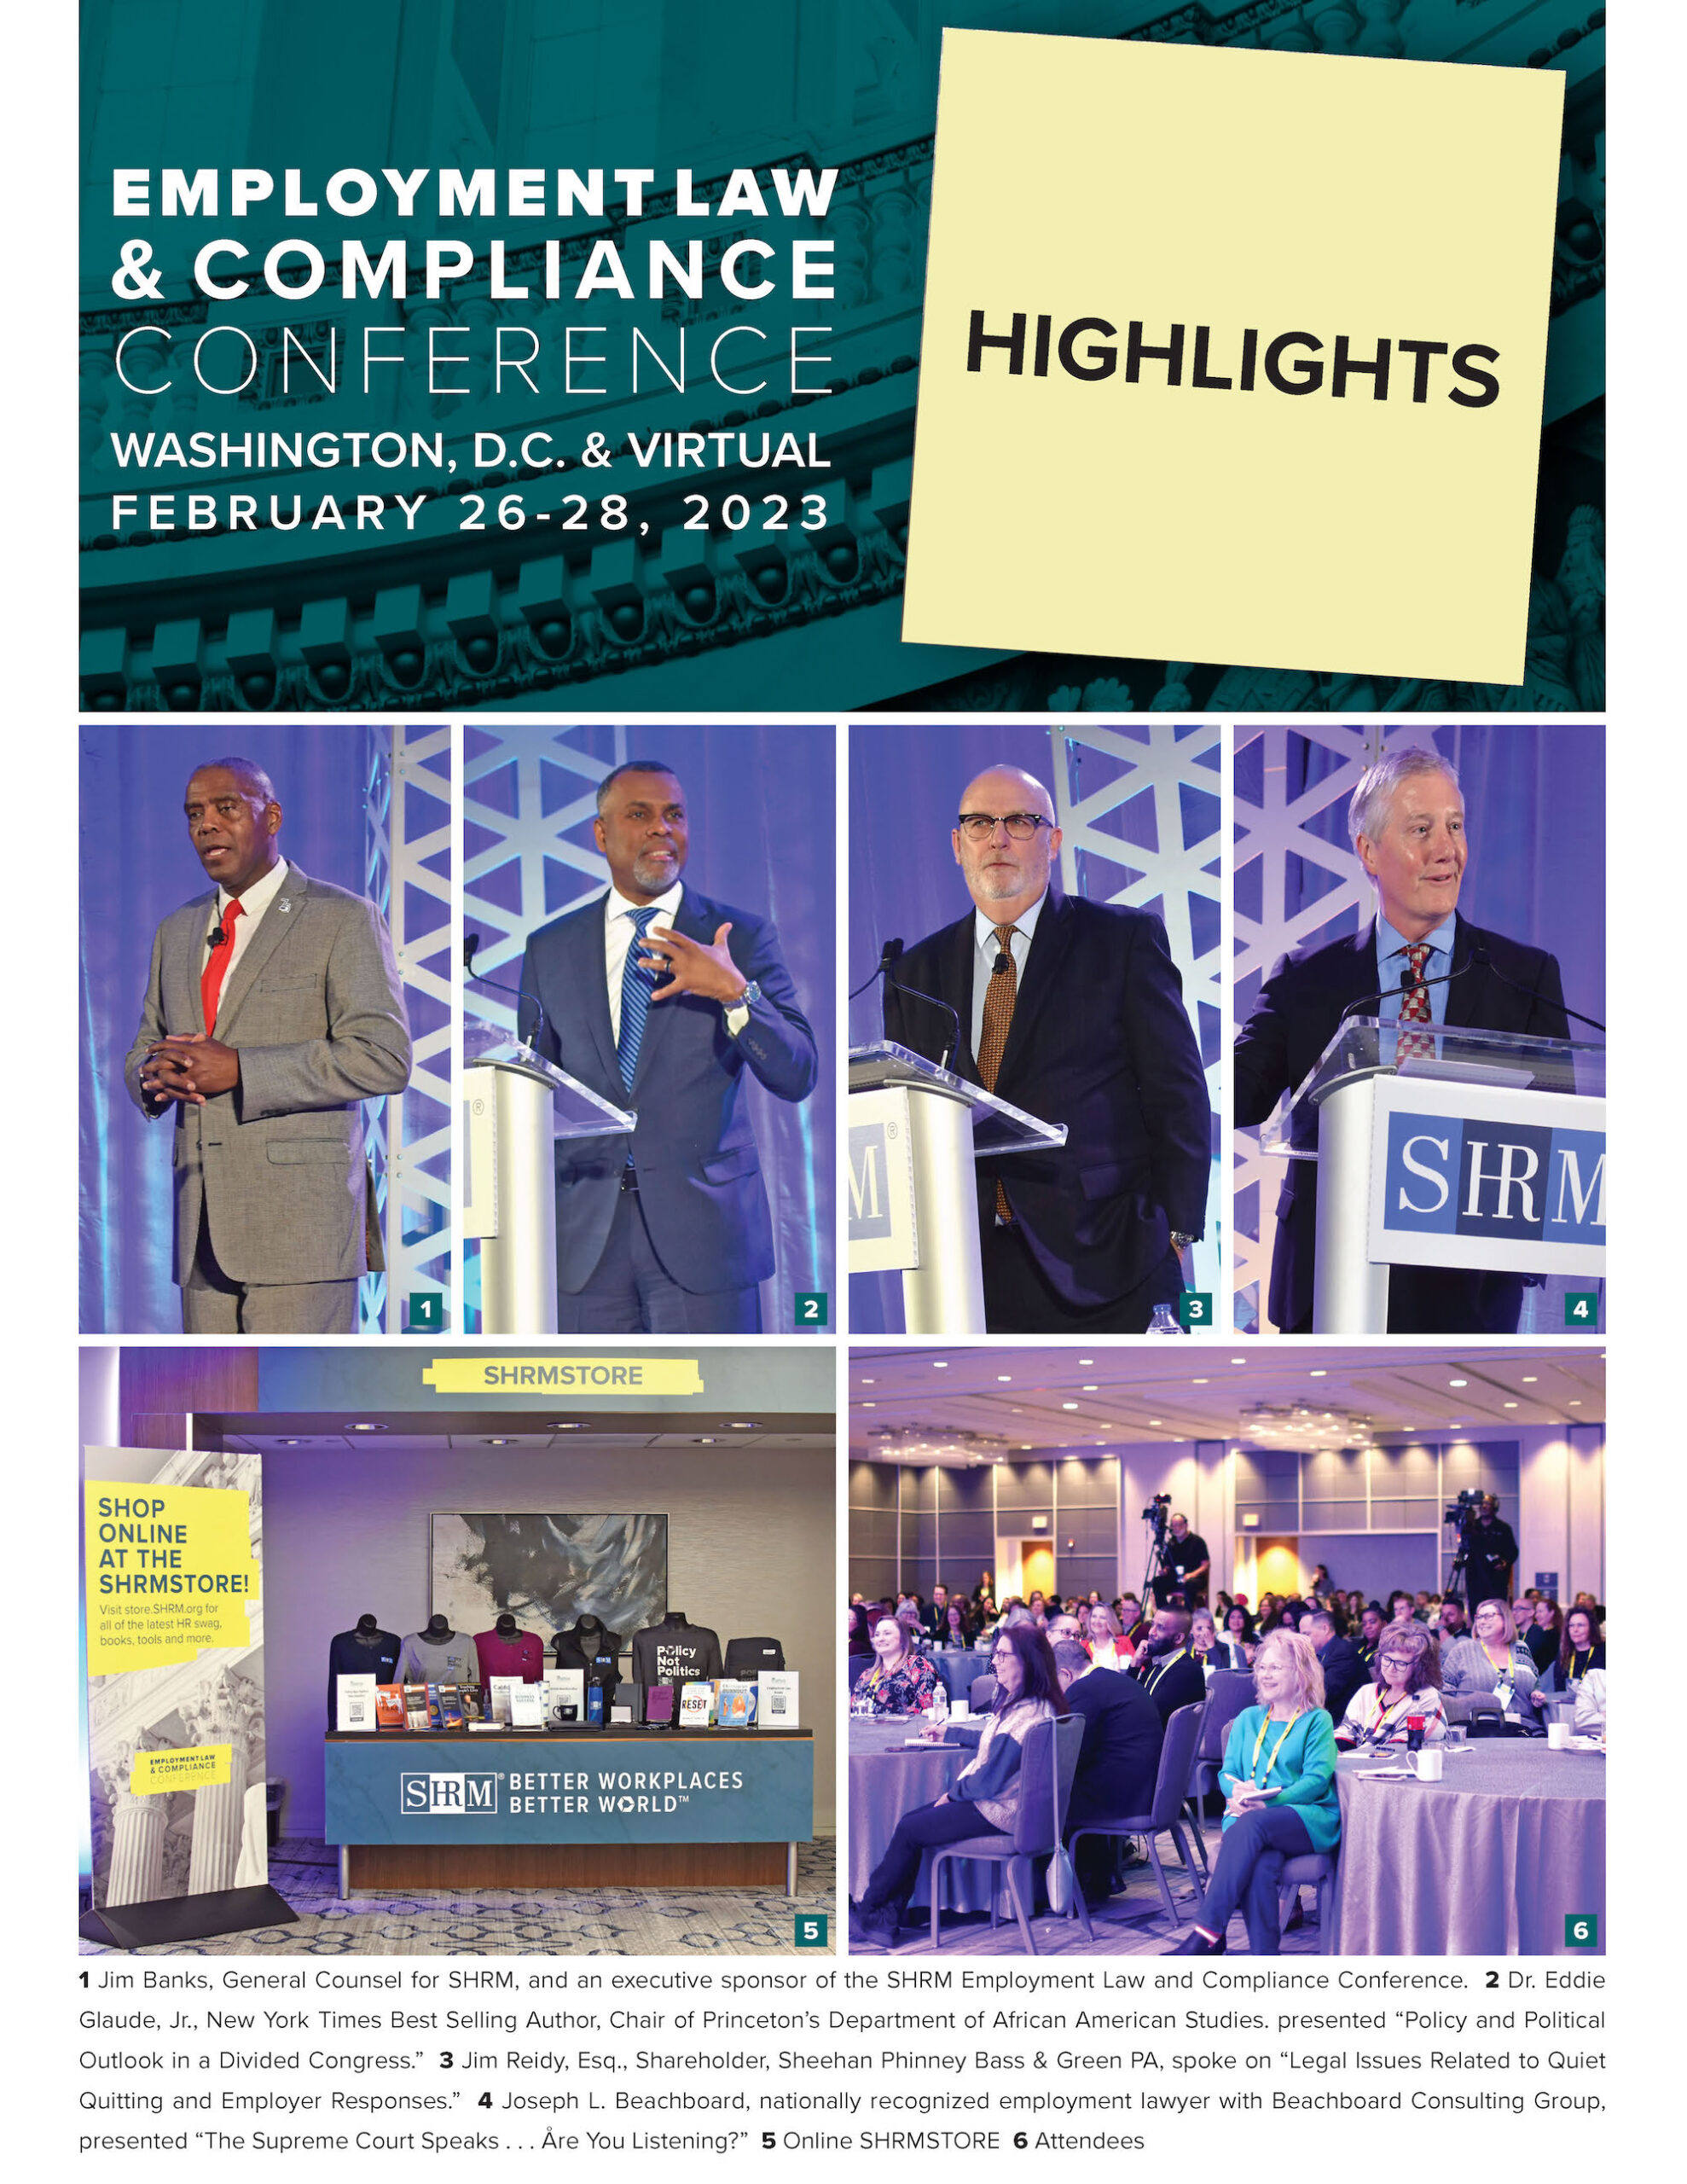 Highlights from the SHRM Employment Law & Compliance Conference in